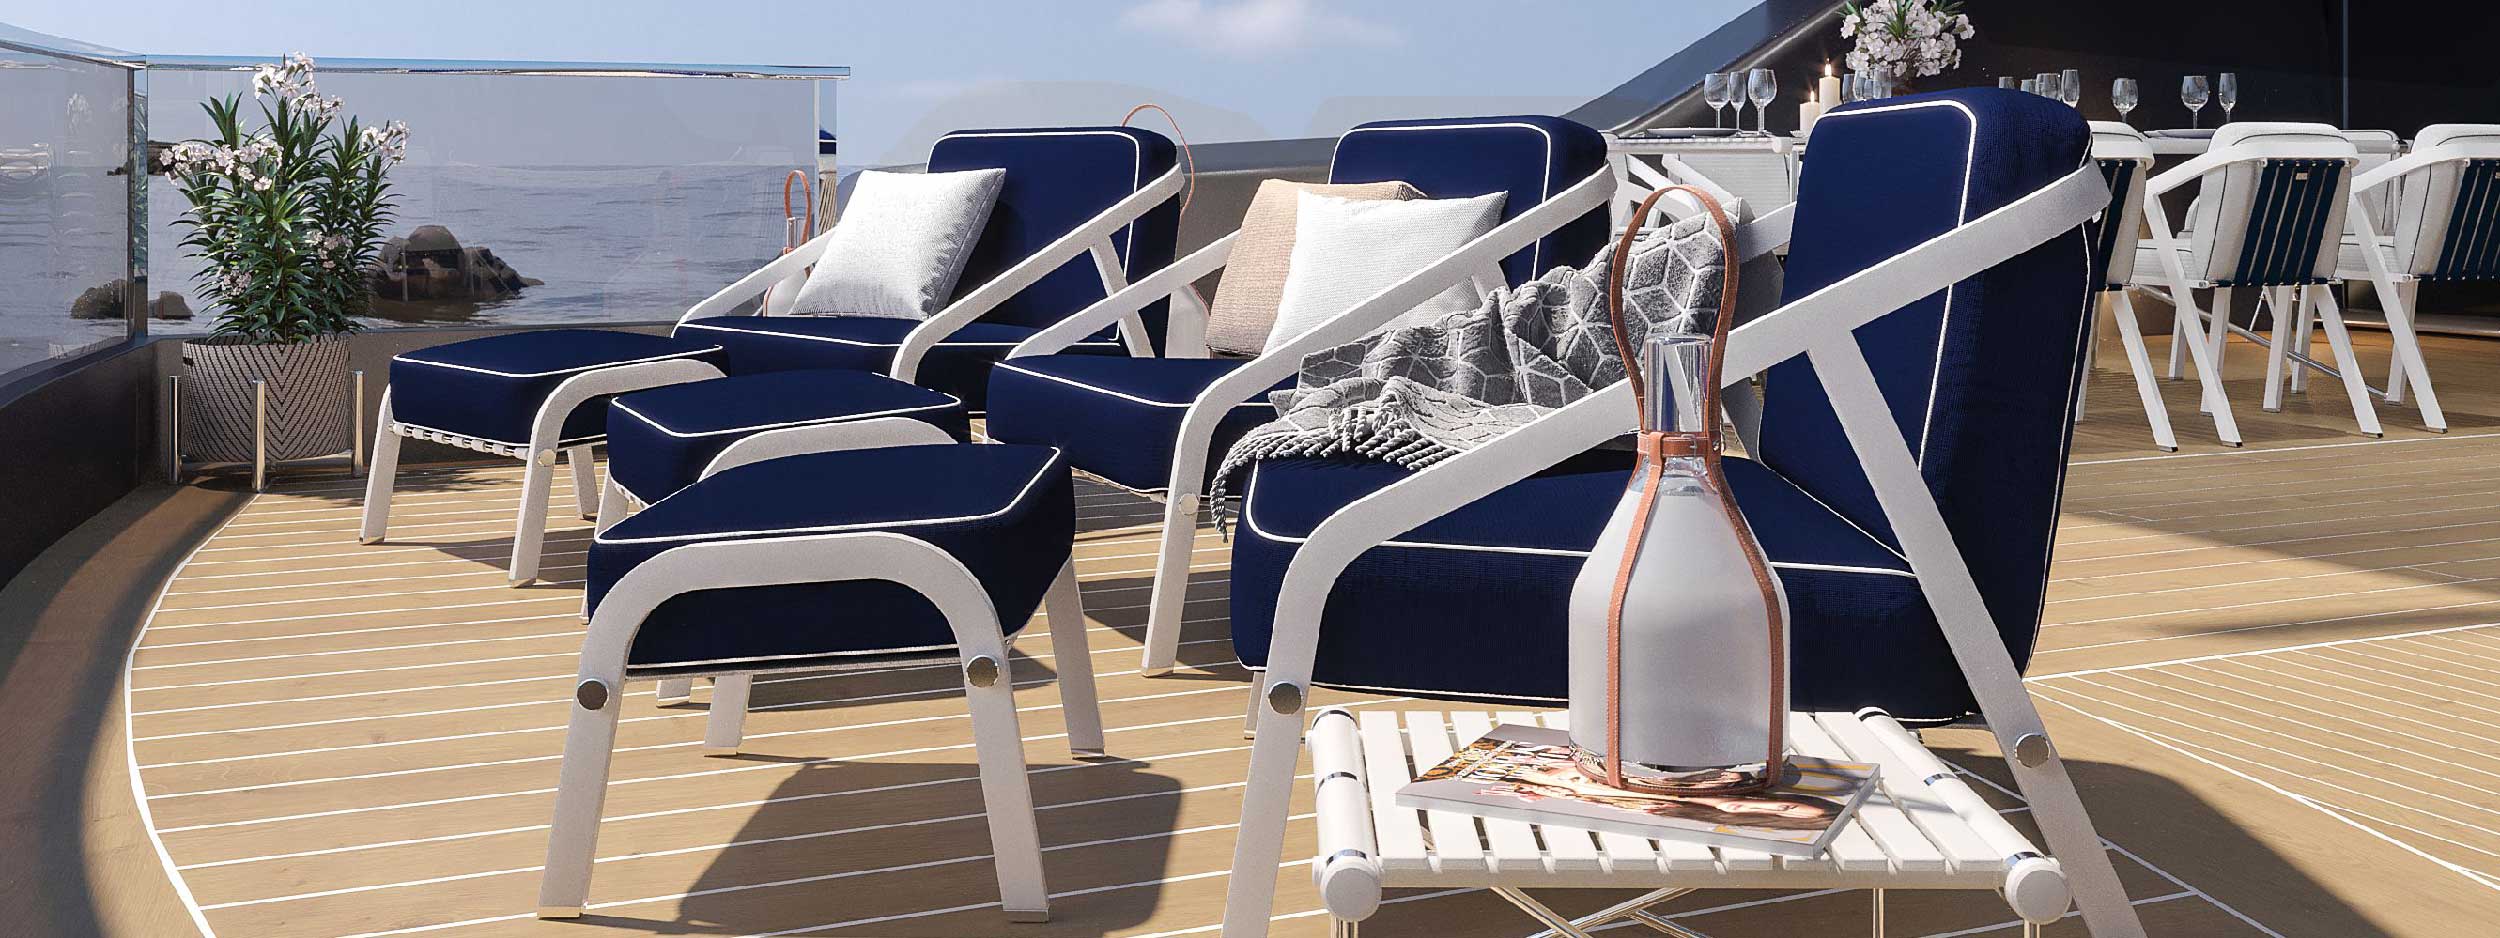 Image of Ribbon lounge chairs with white aluminium frames and navy blue cushions with white piping